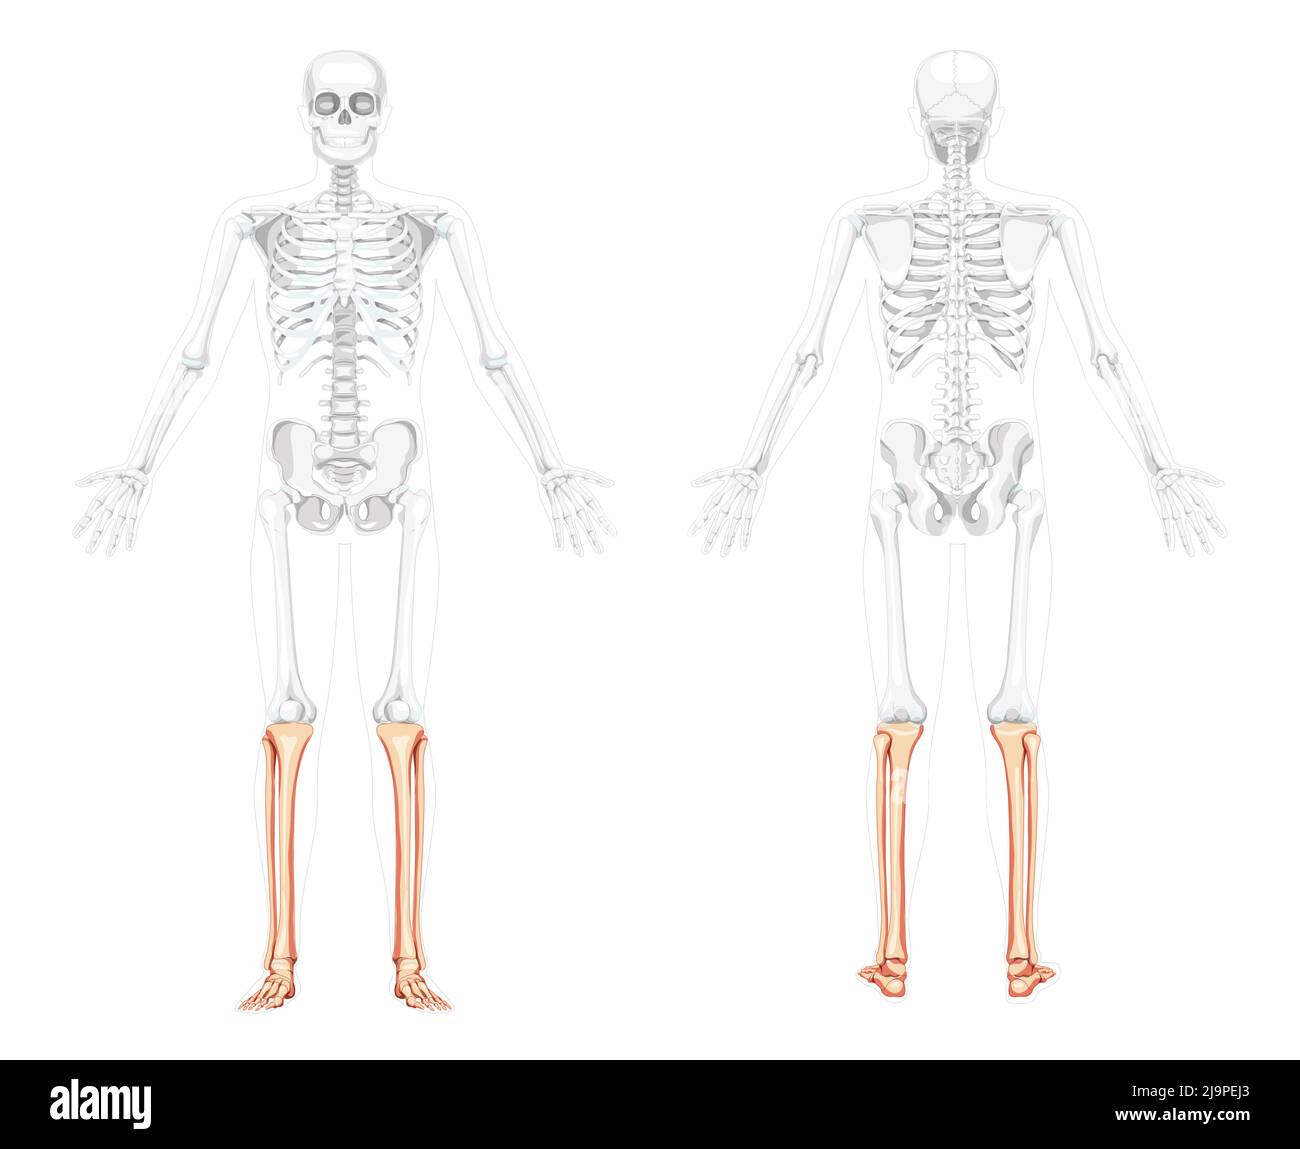 Skeleton leg tibia, fibula Human front back side view with two arm open poses with partly transparent bones position. Realistic flat concept Vector illustration of anatomy isolated on white background Stock Vector